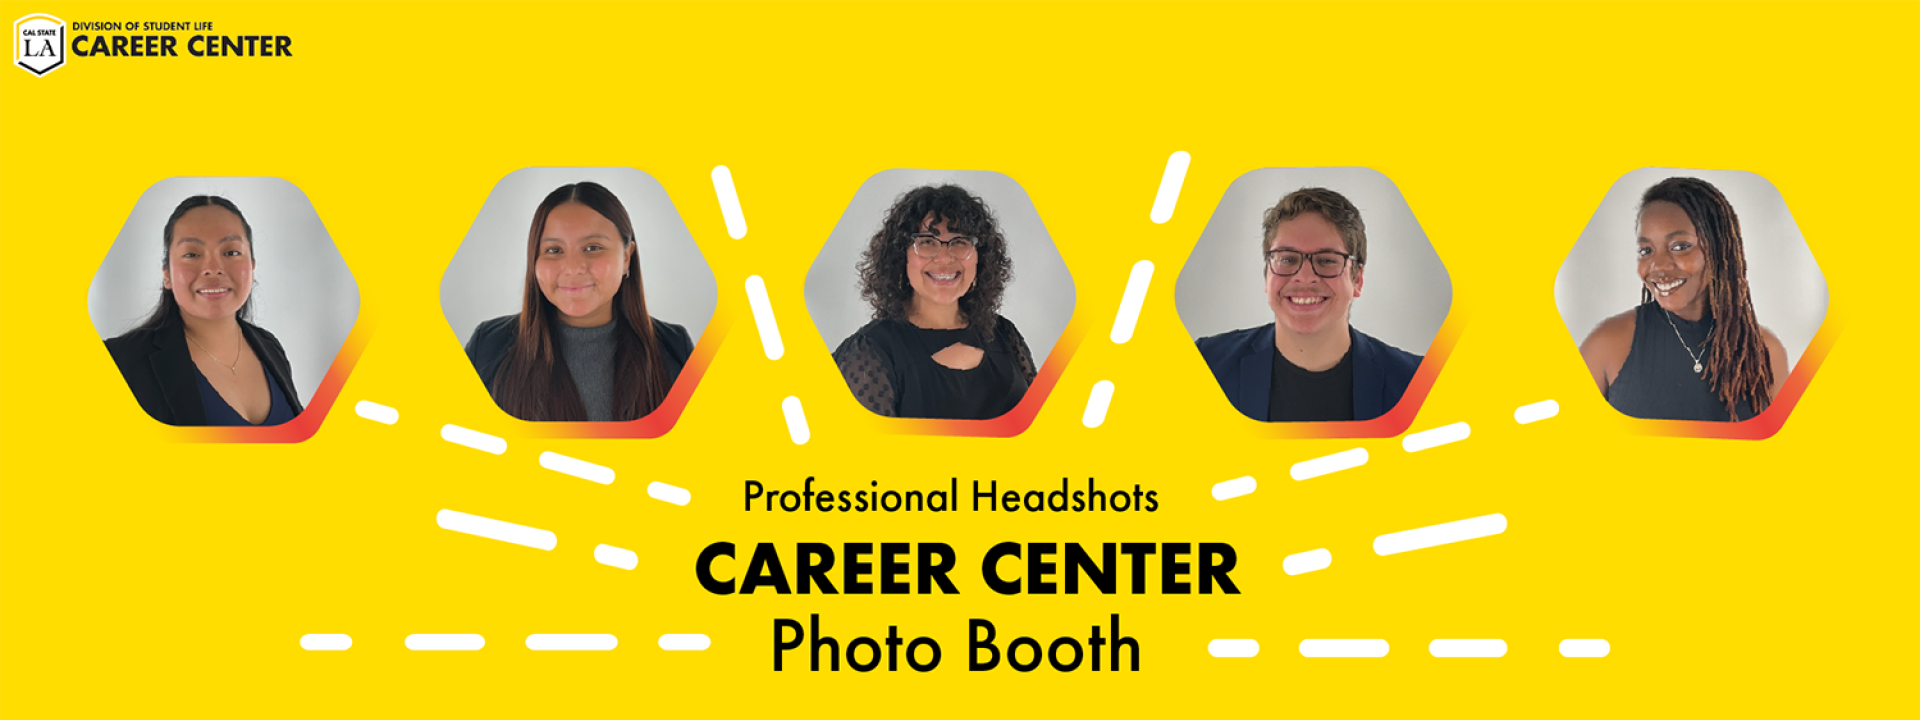 Students smiling. Professional Headshots, Career Center Photo Booth, Cal State LA Division of Student Life Career Center